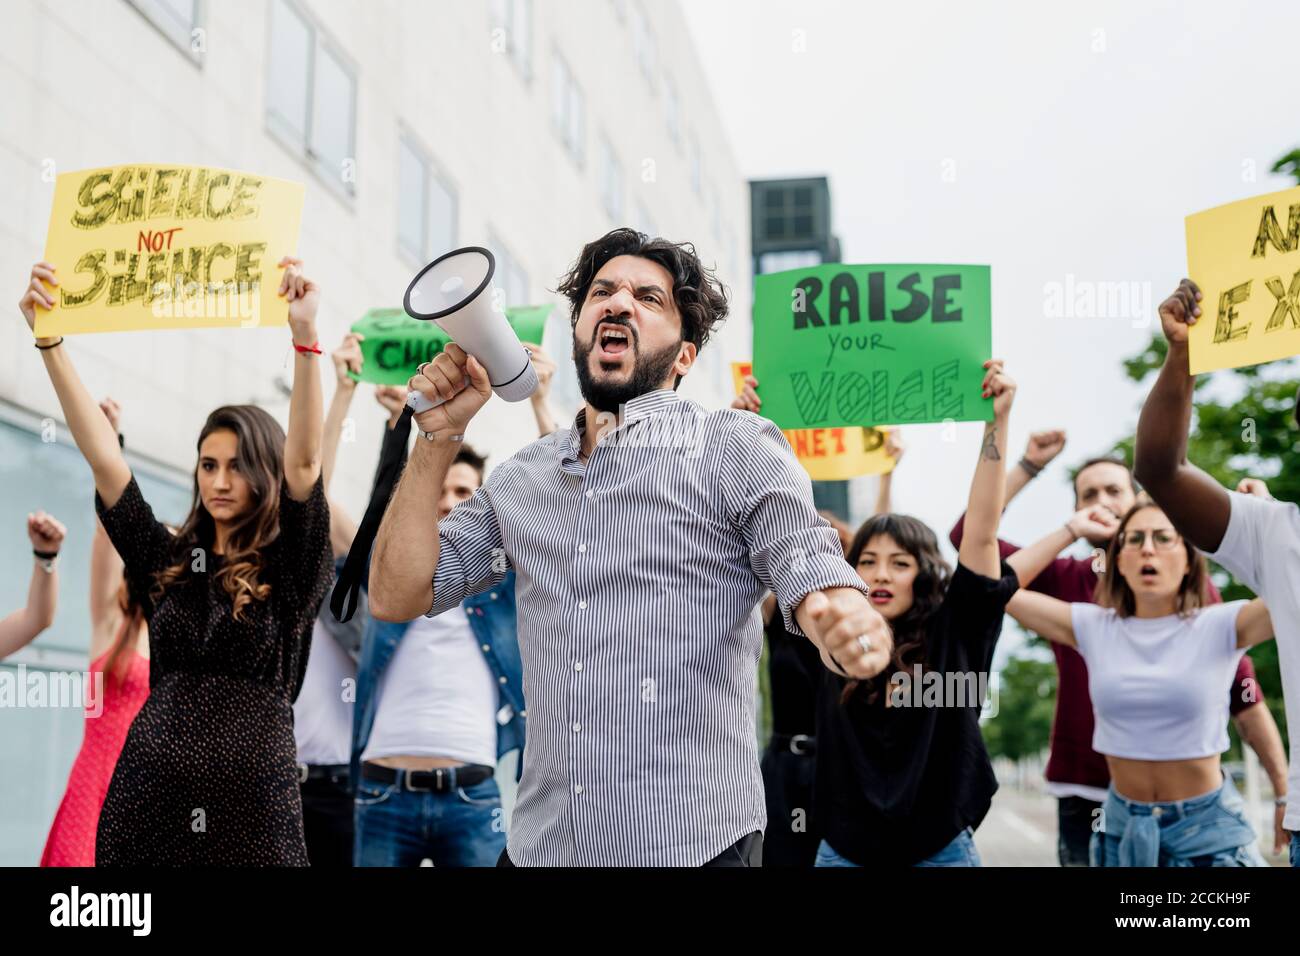 Man screaming through megaphone while protesting with people on street in city Stock Photo